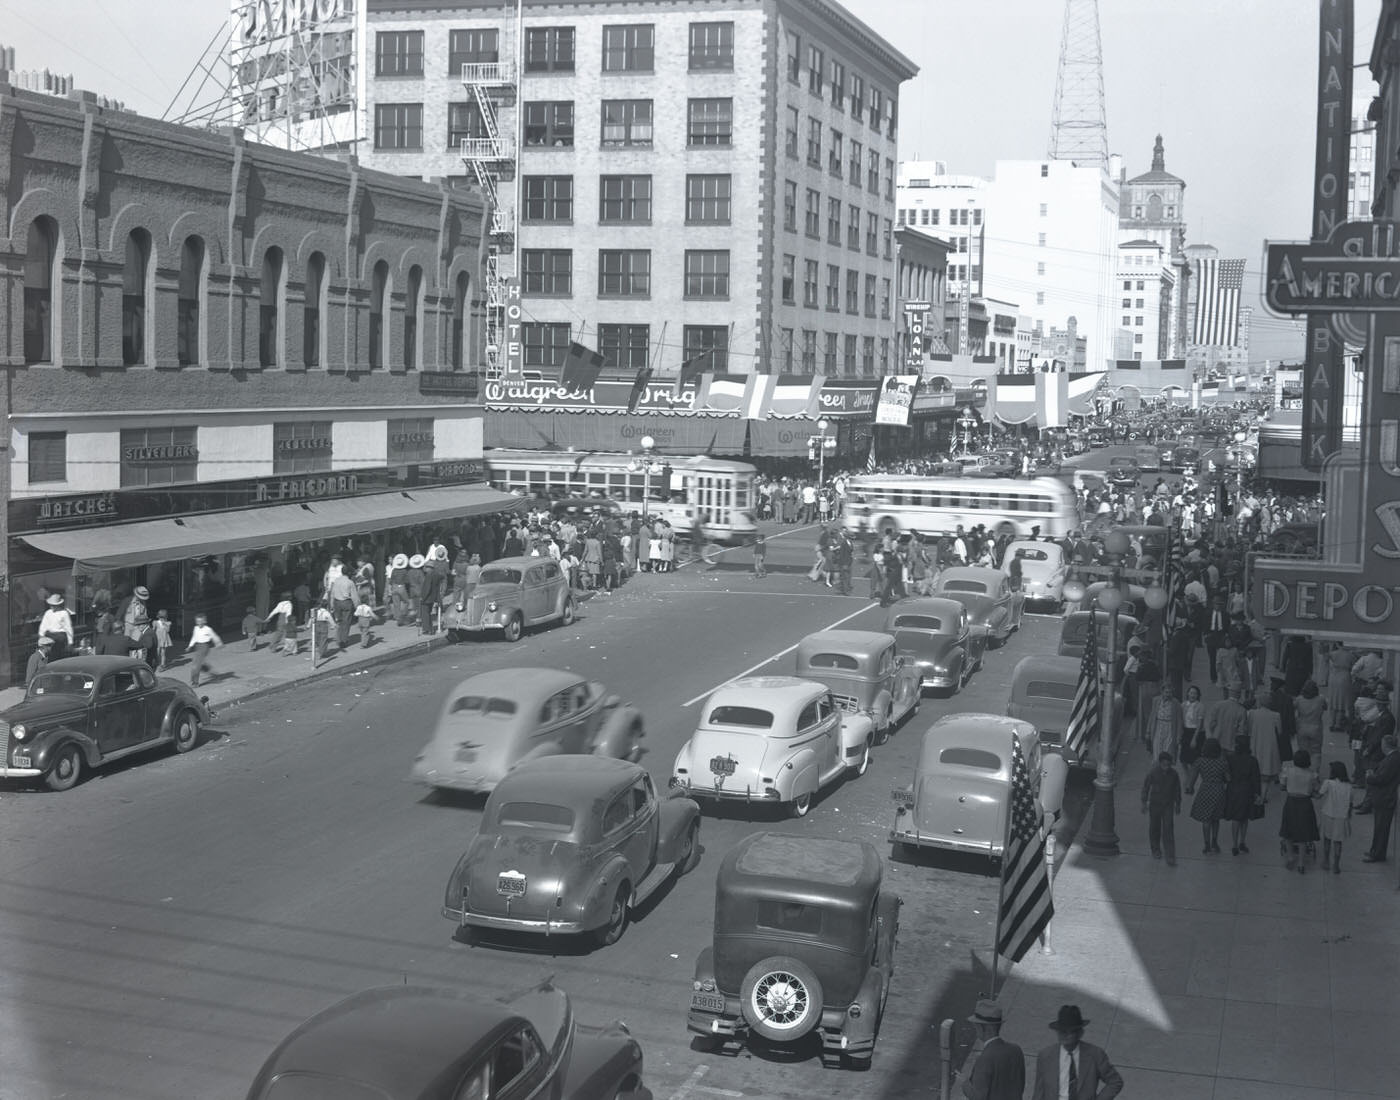 Intersection of Washington St. and Central Ave., 1941